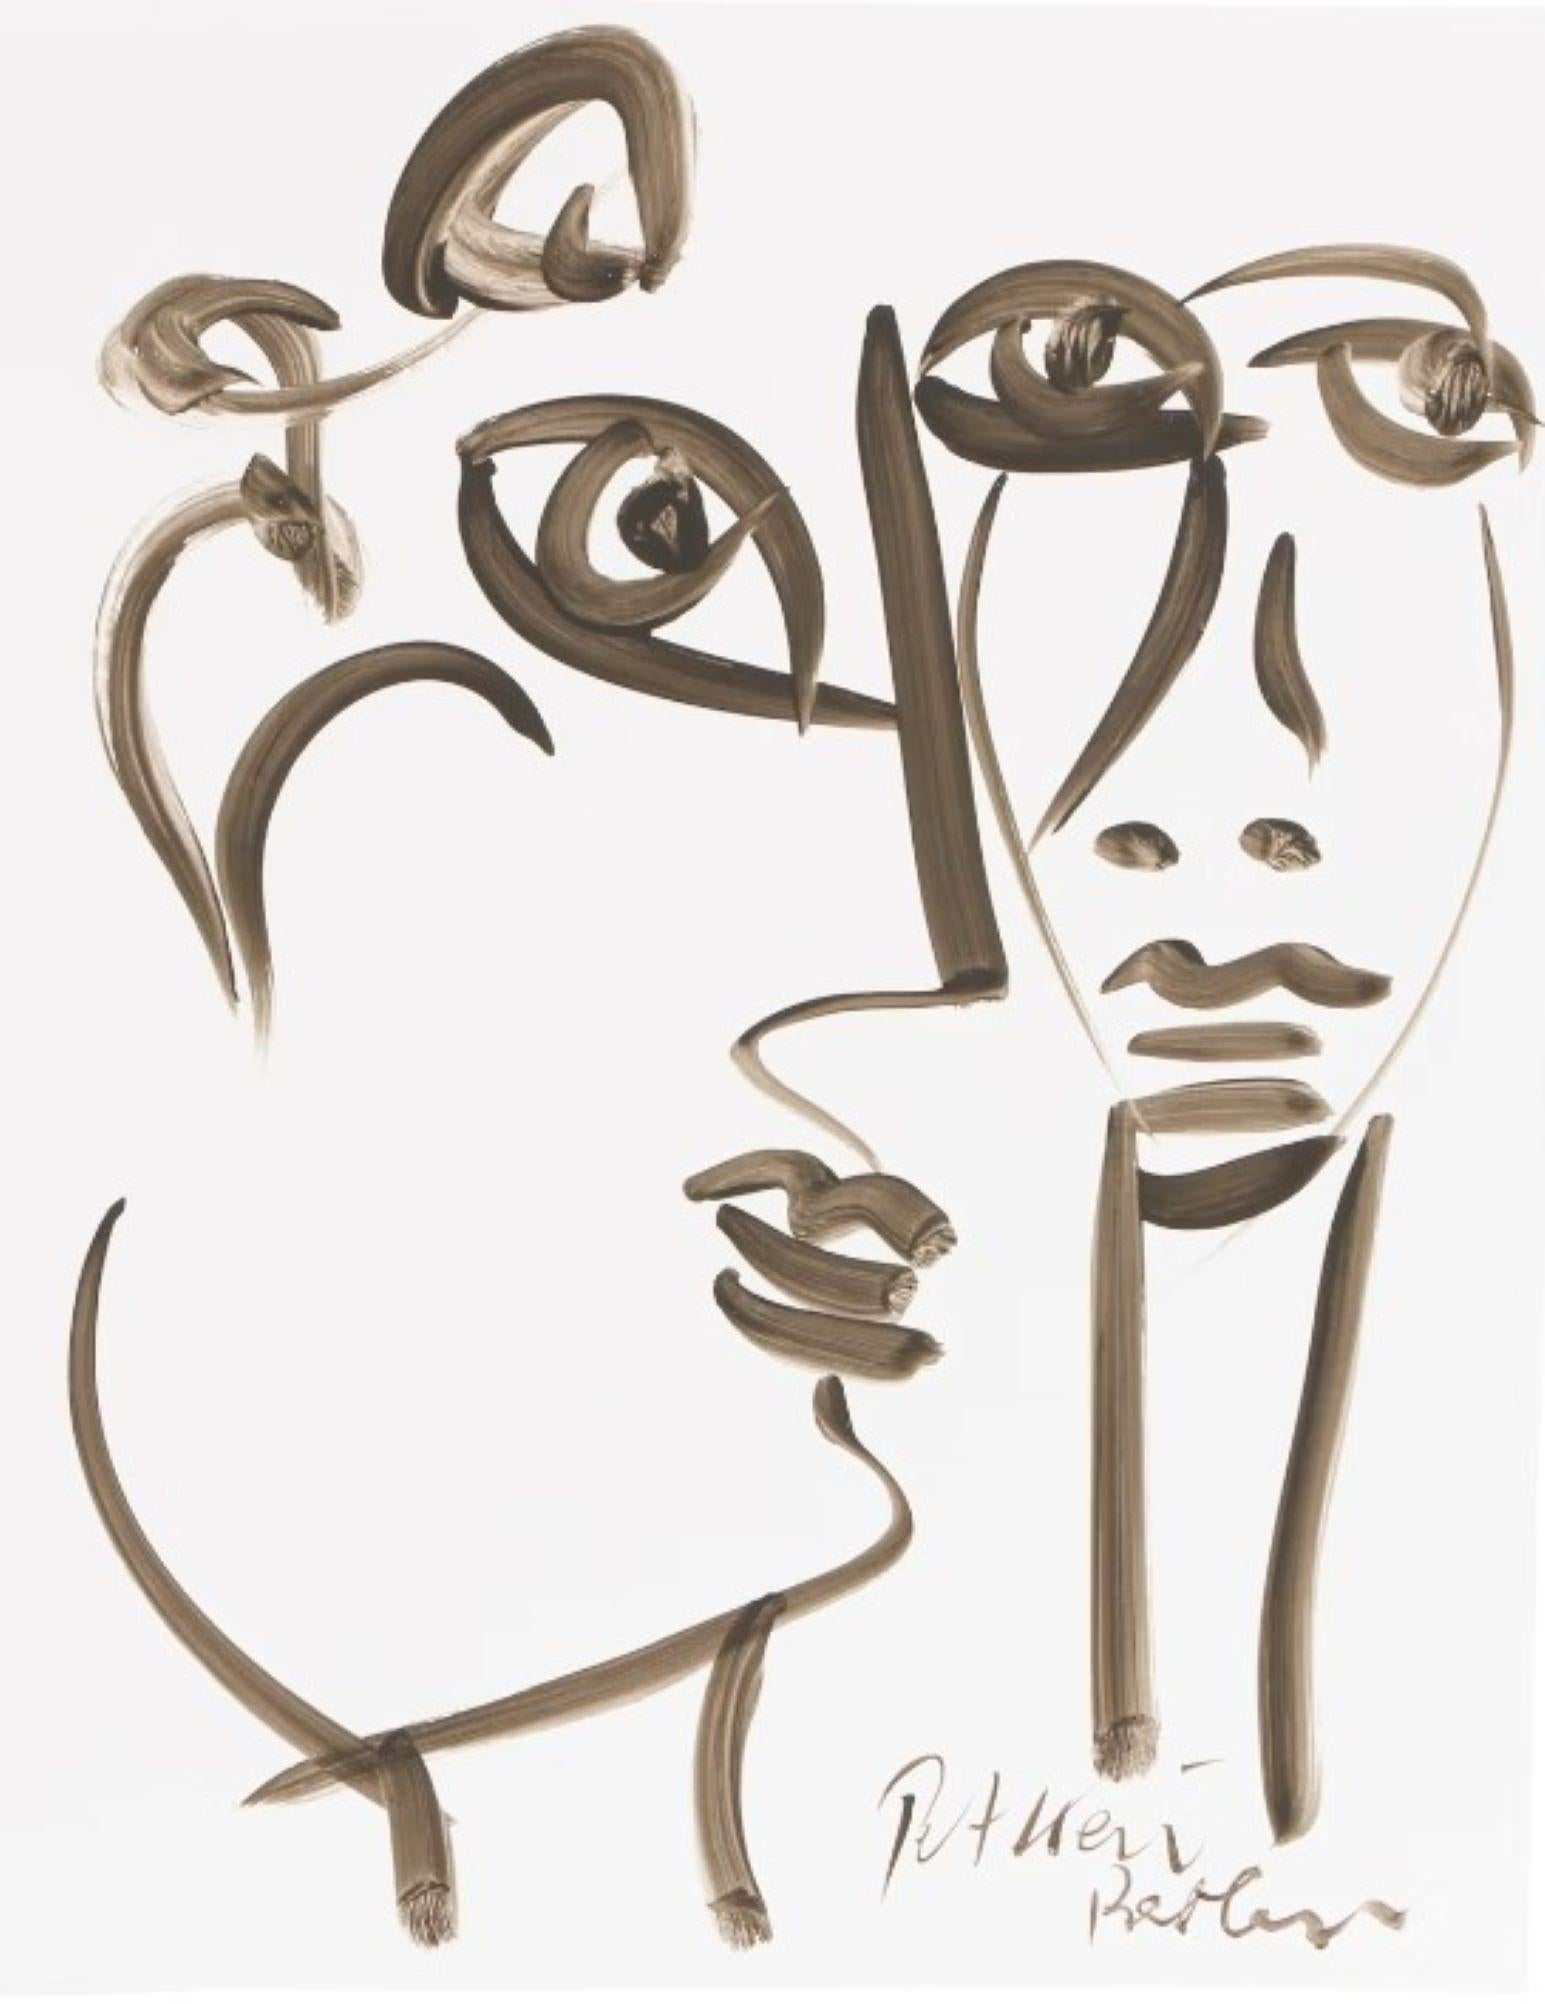 Simplified drawing that expertly captures the expression of the person.
Inscribed 'Berlin' below signature

Artist bio:
Influenced by German Expressionism and graffiti elements, Keil is known for his simplified abstractions of traditional art